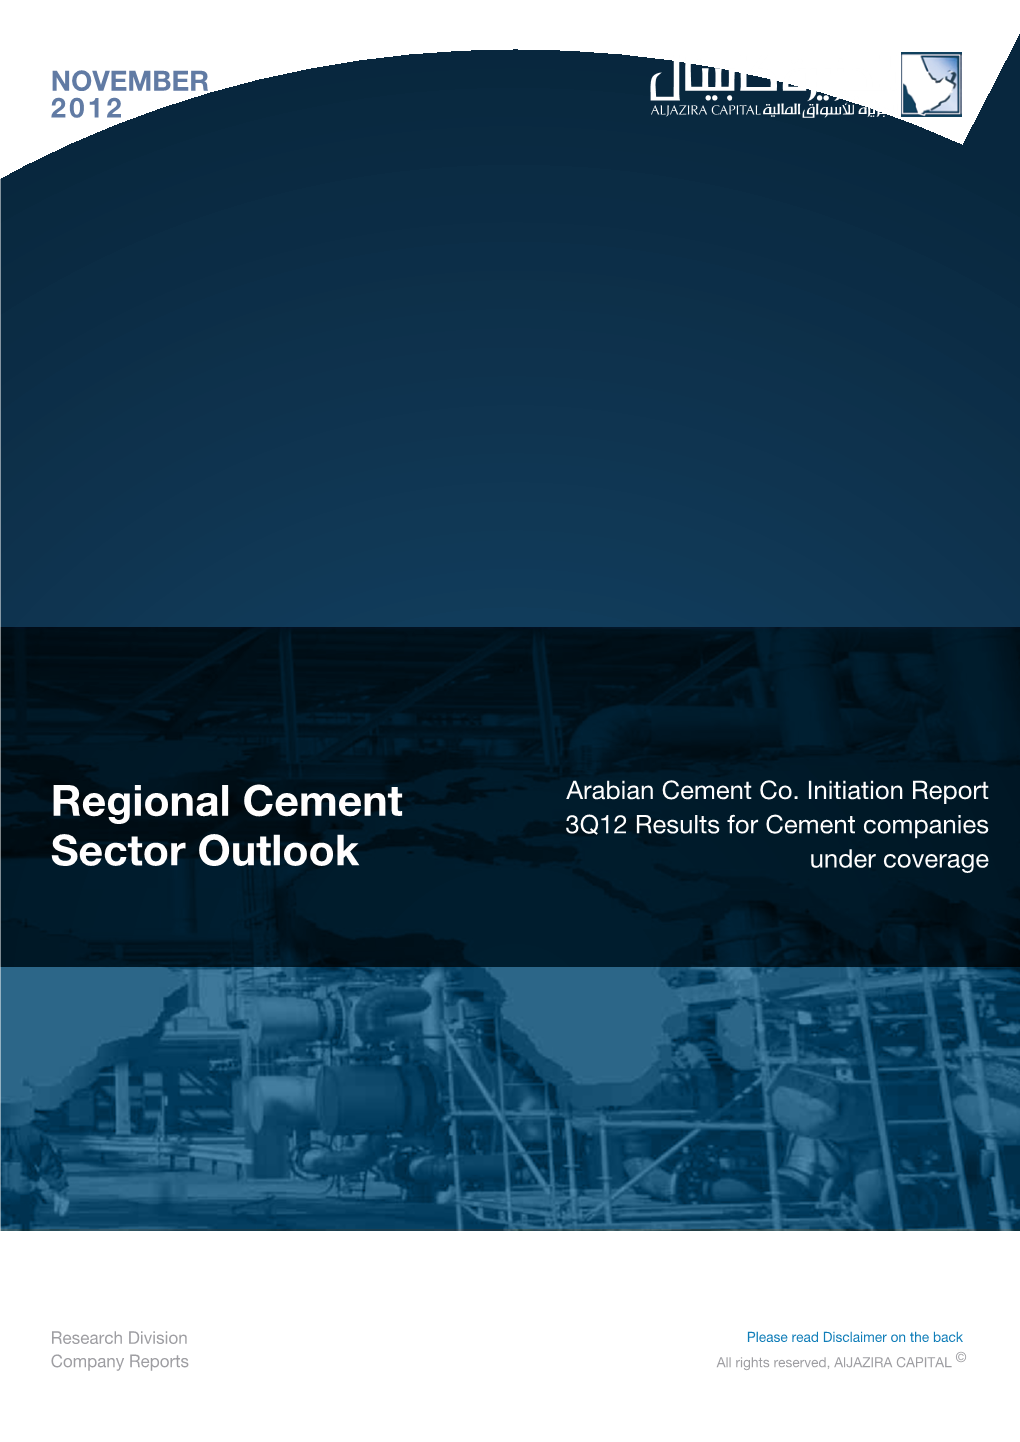 Regional Cement Sector Outlook